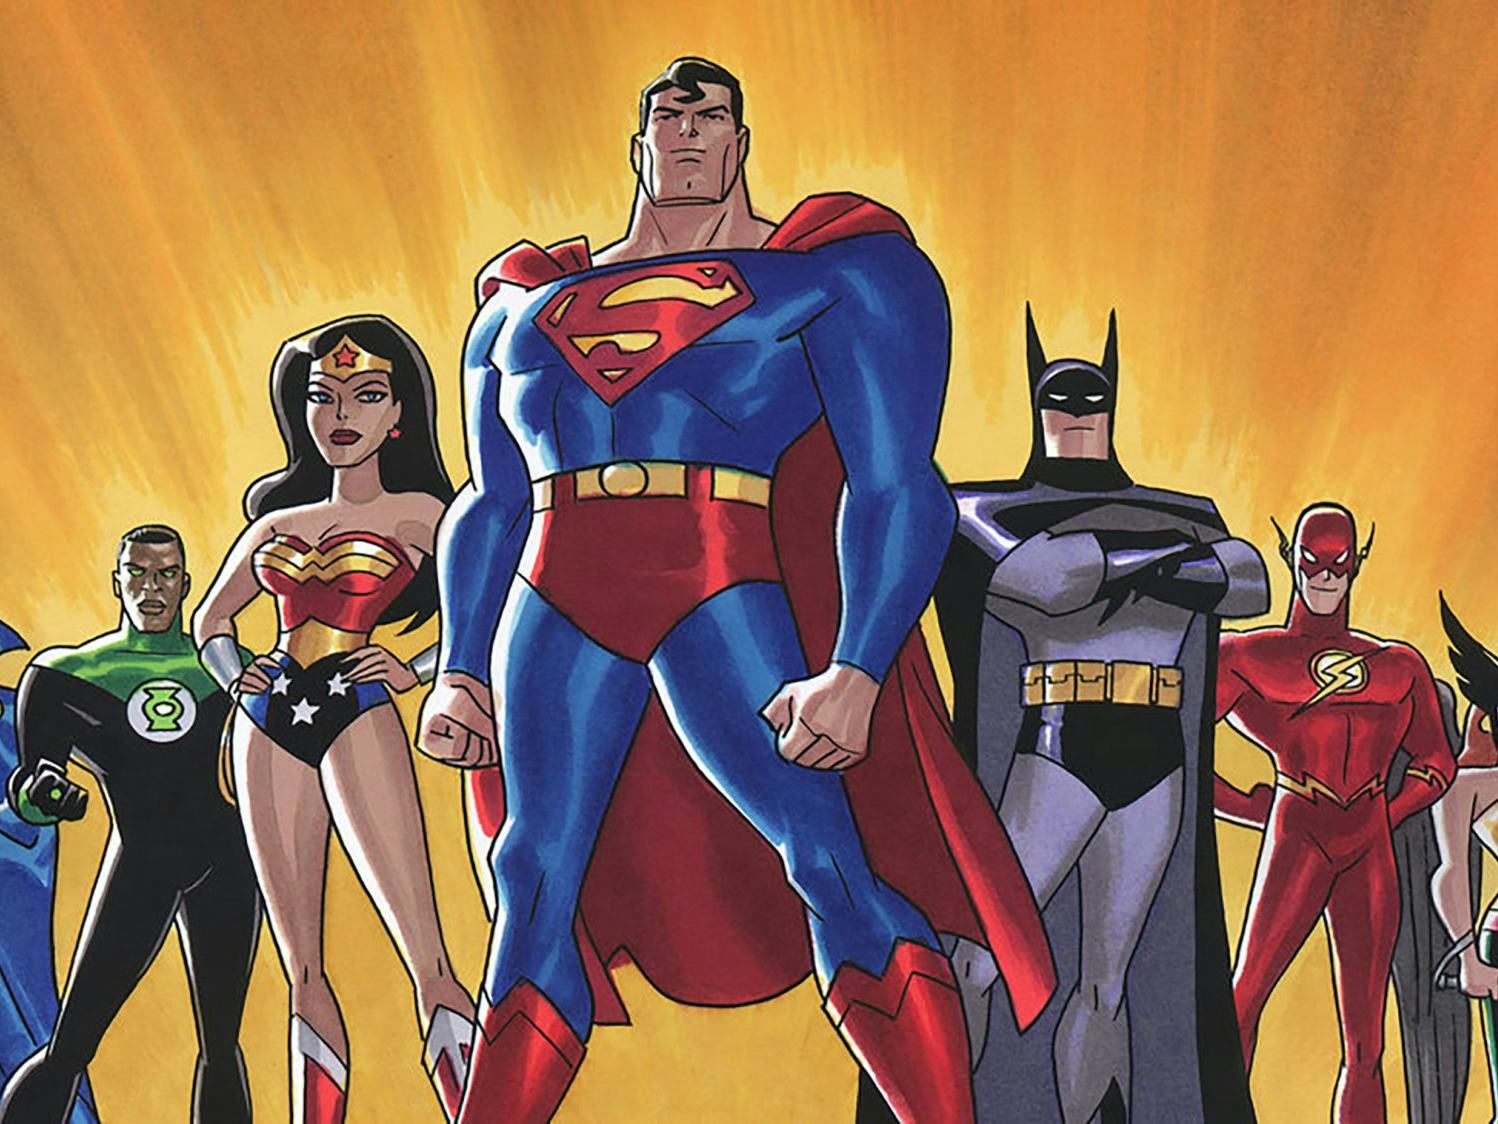 DC animated movies: 8 best films you need to watch ASAP